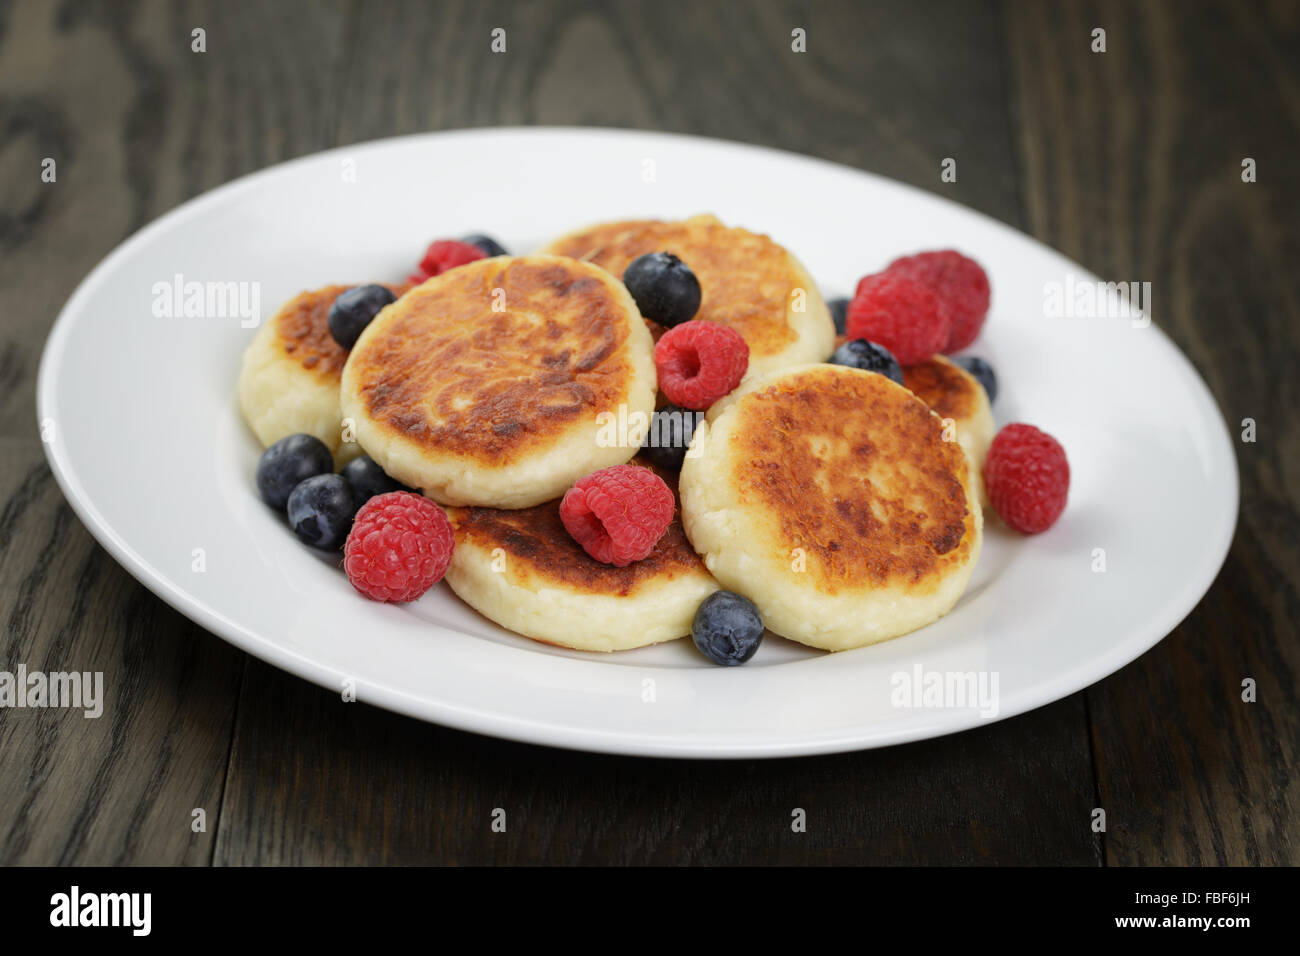 sirniki traditional russian pancakes from cottage cheese with berries Stock Photo